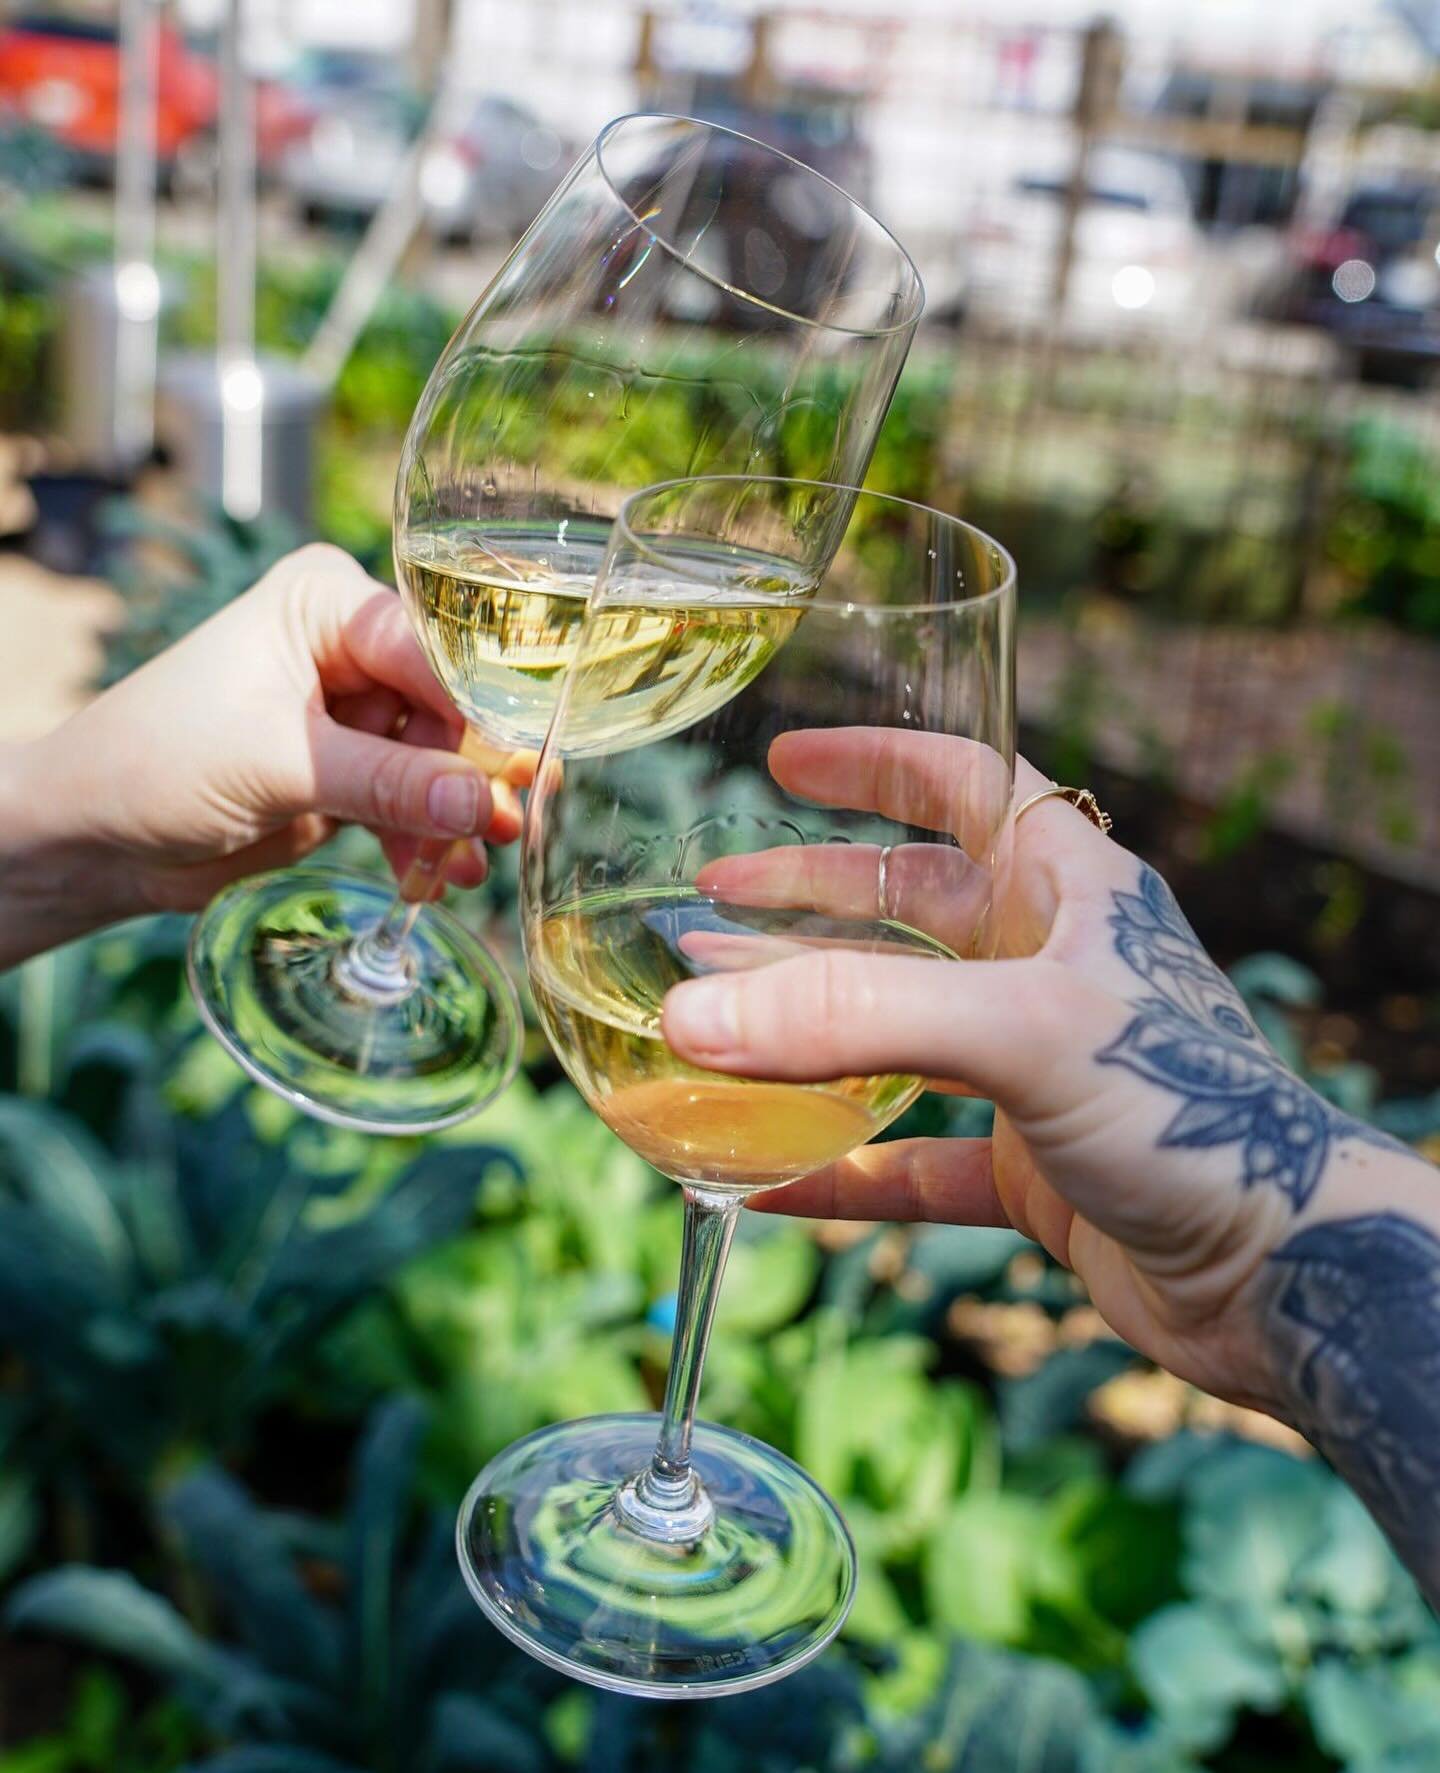 A Coltivare Itinerary &mdash;⁠
◽️ Start with wine in the garden - either a crisp white or @borgomaragliano_official Cha Pi P&eacute;t-Nat⁠
◽️ Admire the rainbow chard that is positively thriving⁠
◽️ Enjoy garden ingredients in dishes on the menu⁠
◽️ 